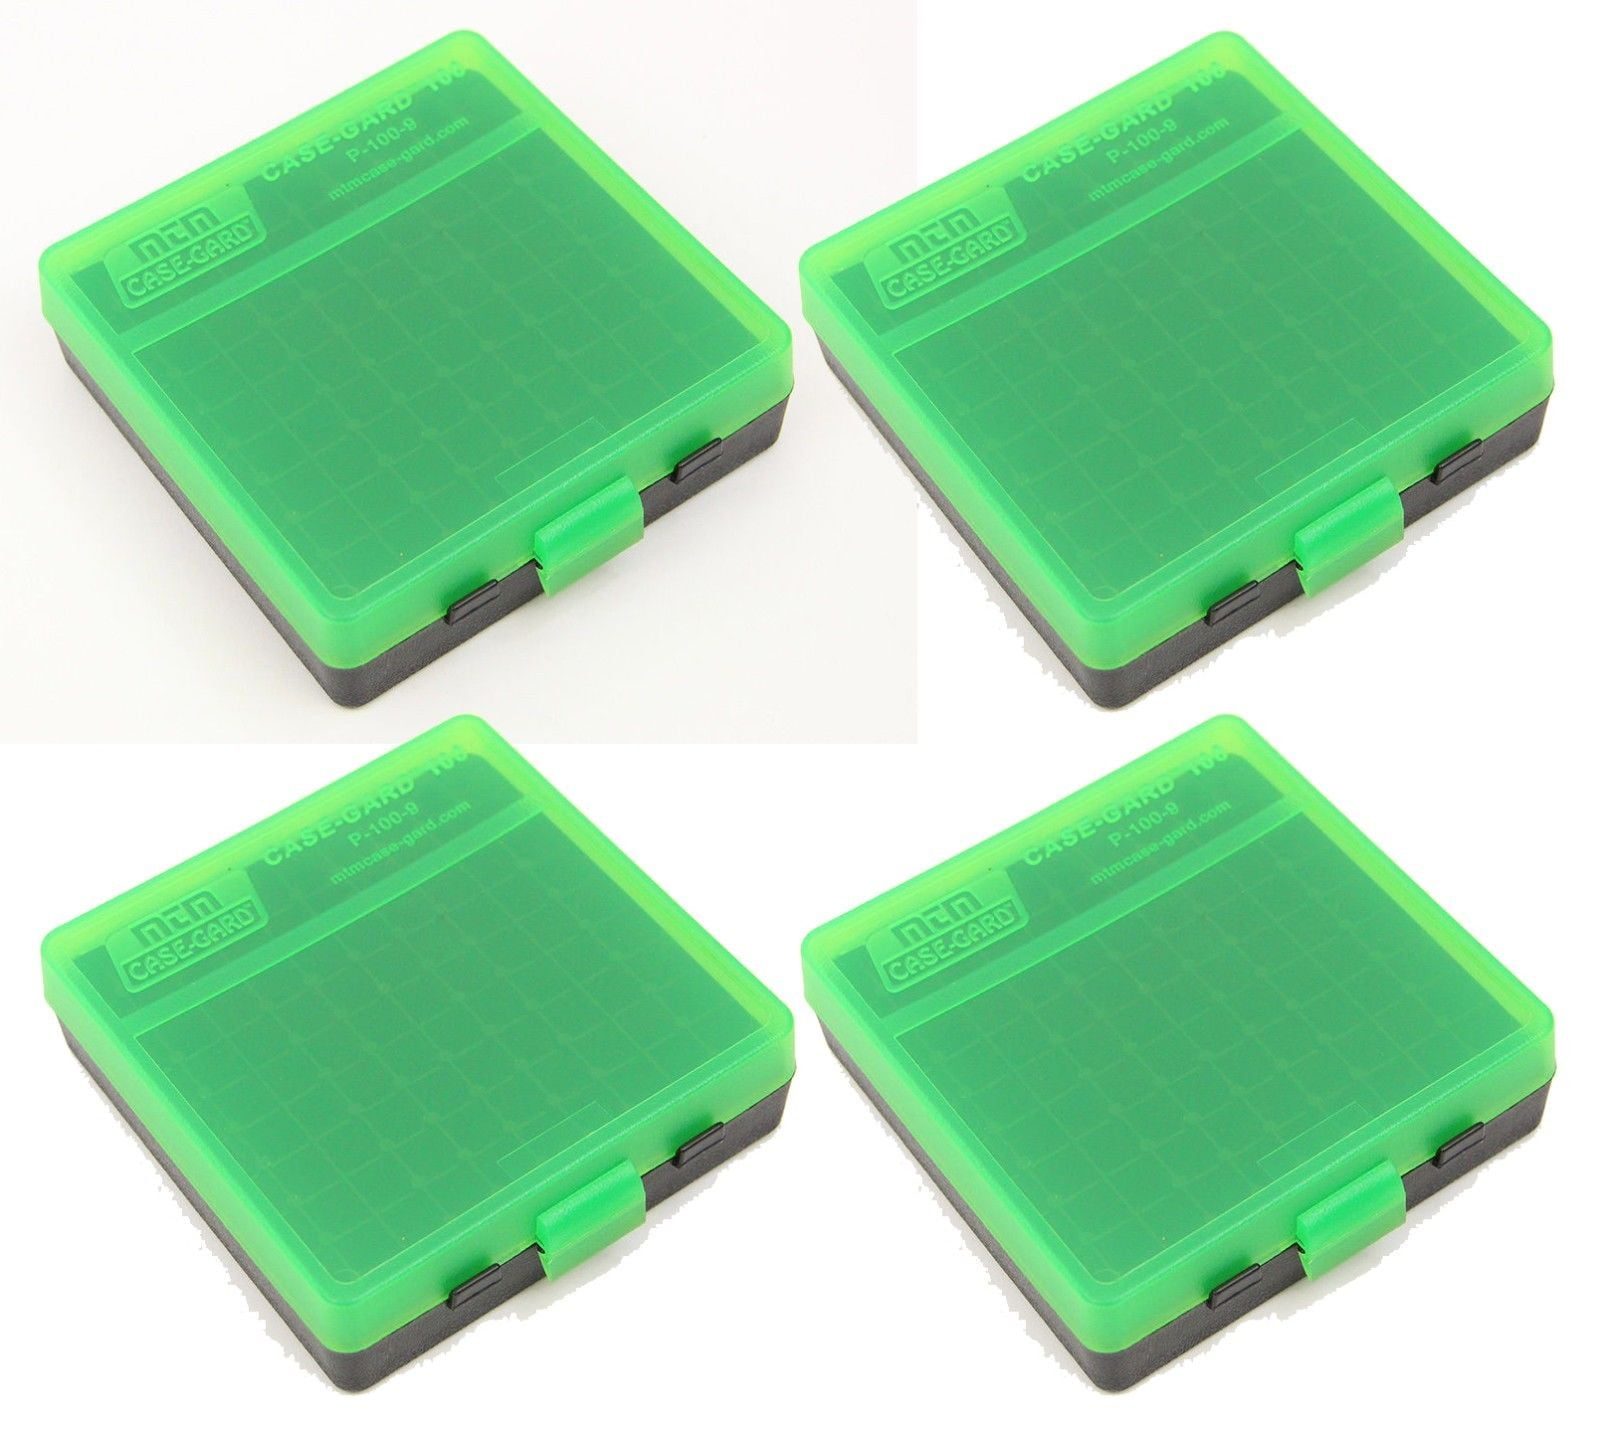 5 GREEN 50 Round 9mm / 380 MTM PLASTIC AMMO BOXES FREE SHIPPING 